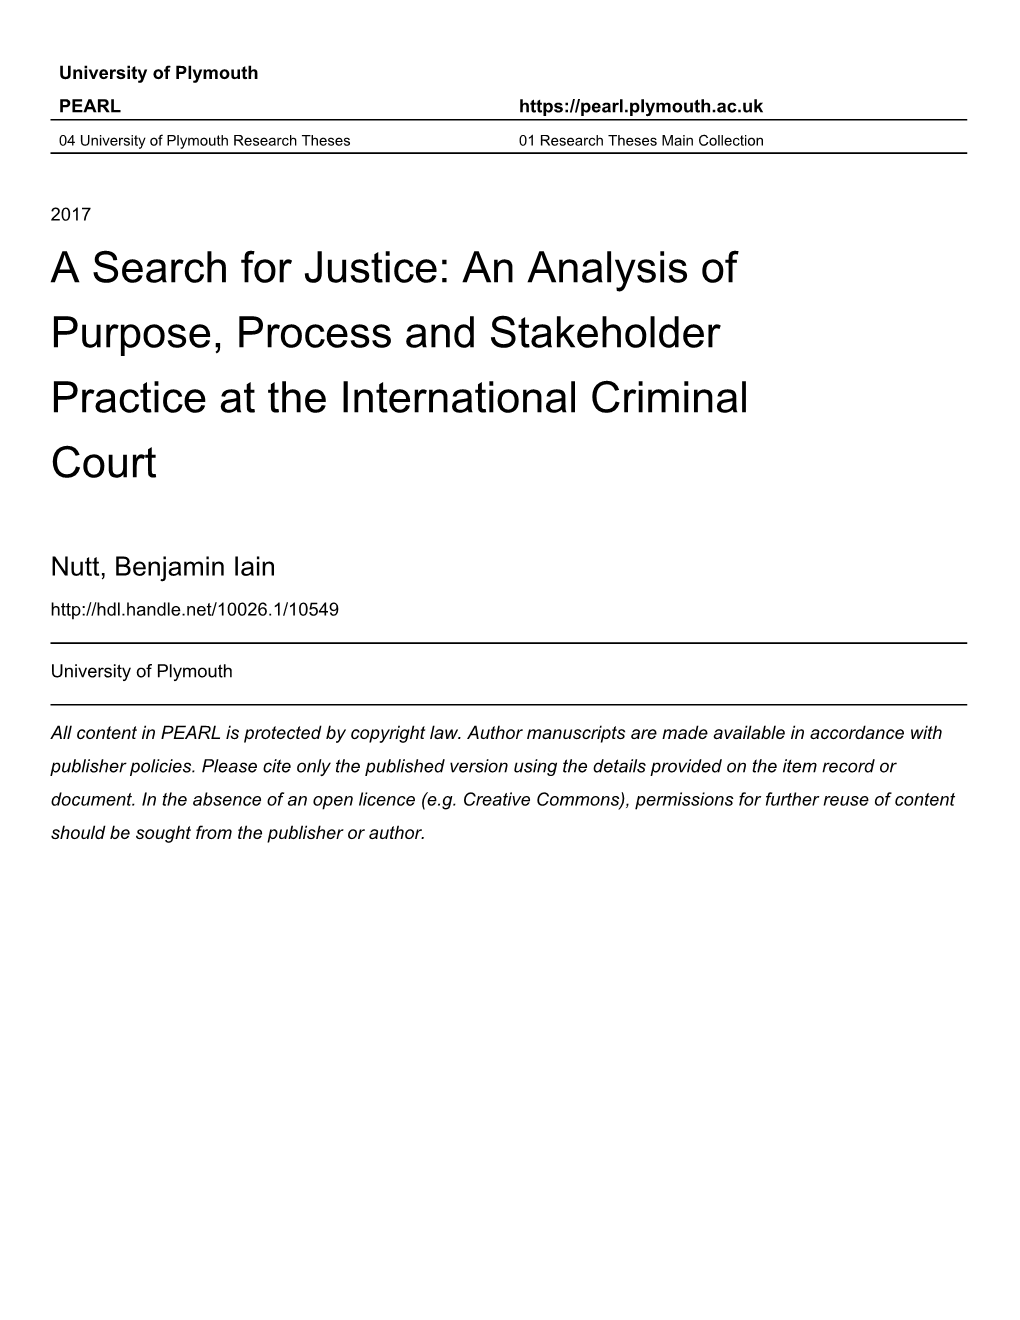 A Search for Justice: an Analysis of Purpose, Process and Stakeholder Practice at the International Criminal Court